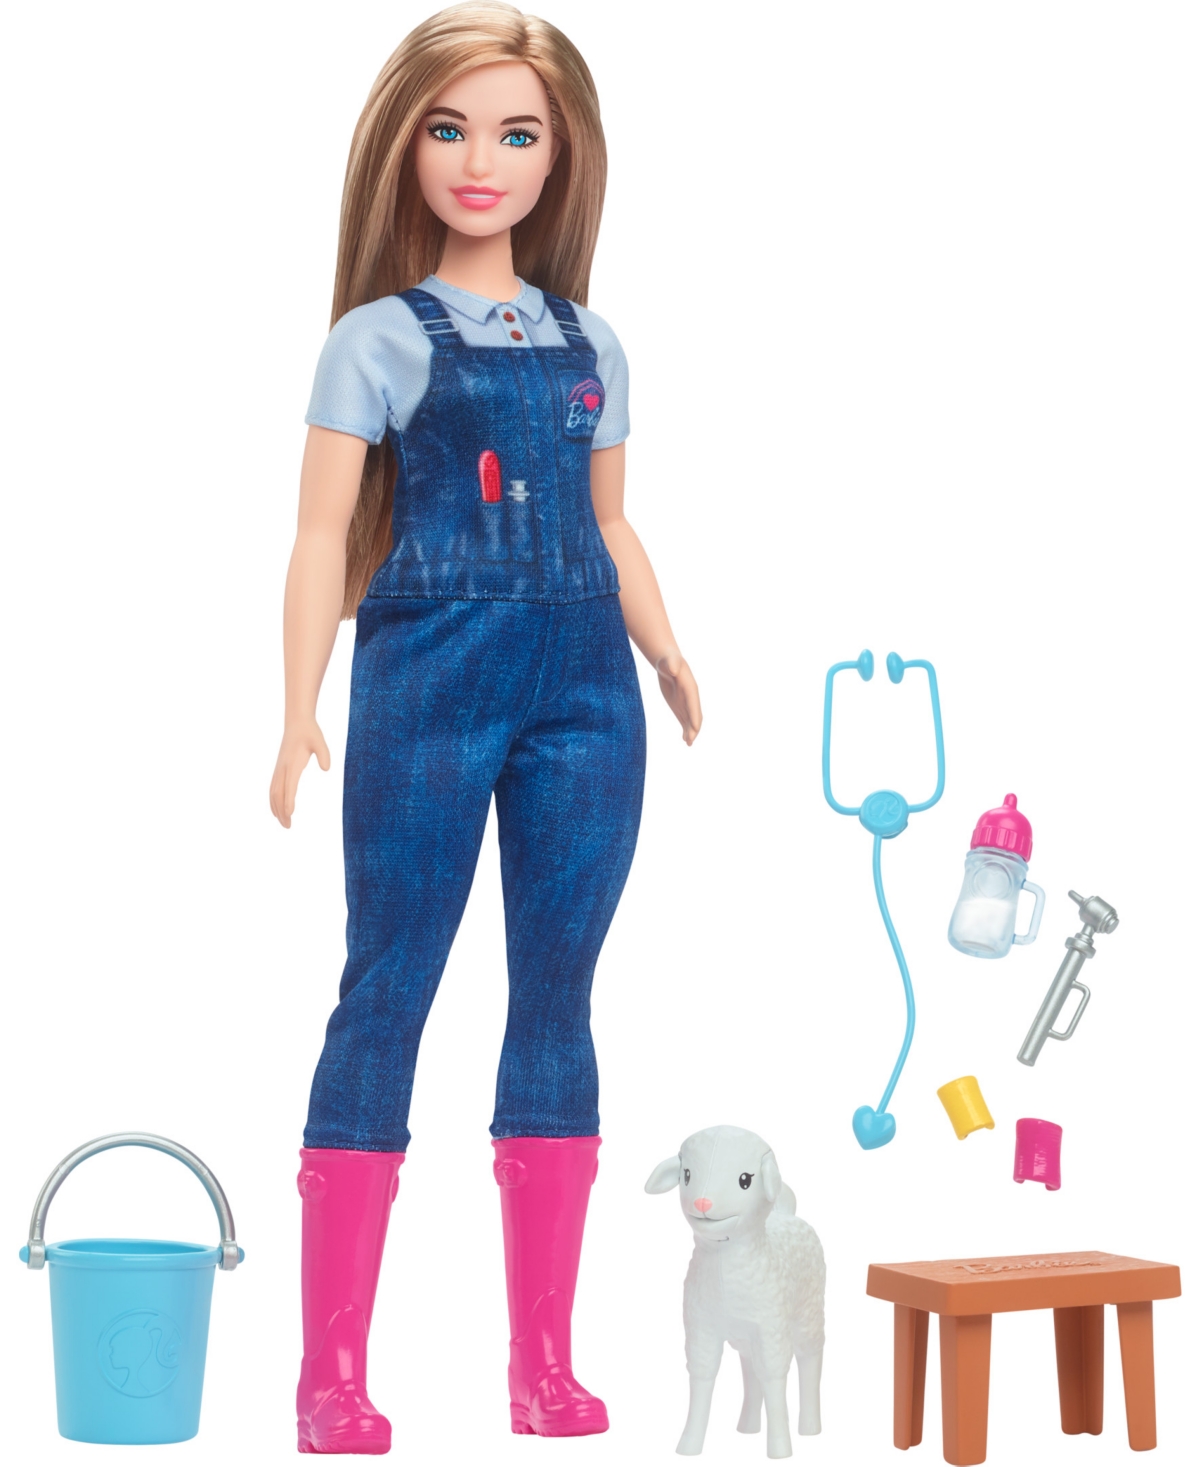 Shop Barbie 65th Anniversary Careers Farm Vet Doll And 10 Accessories Including Lamb With Moving Ears In Multi